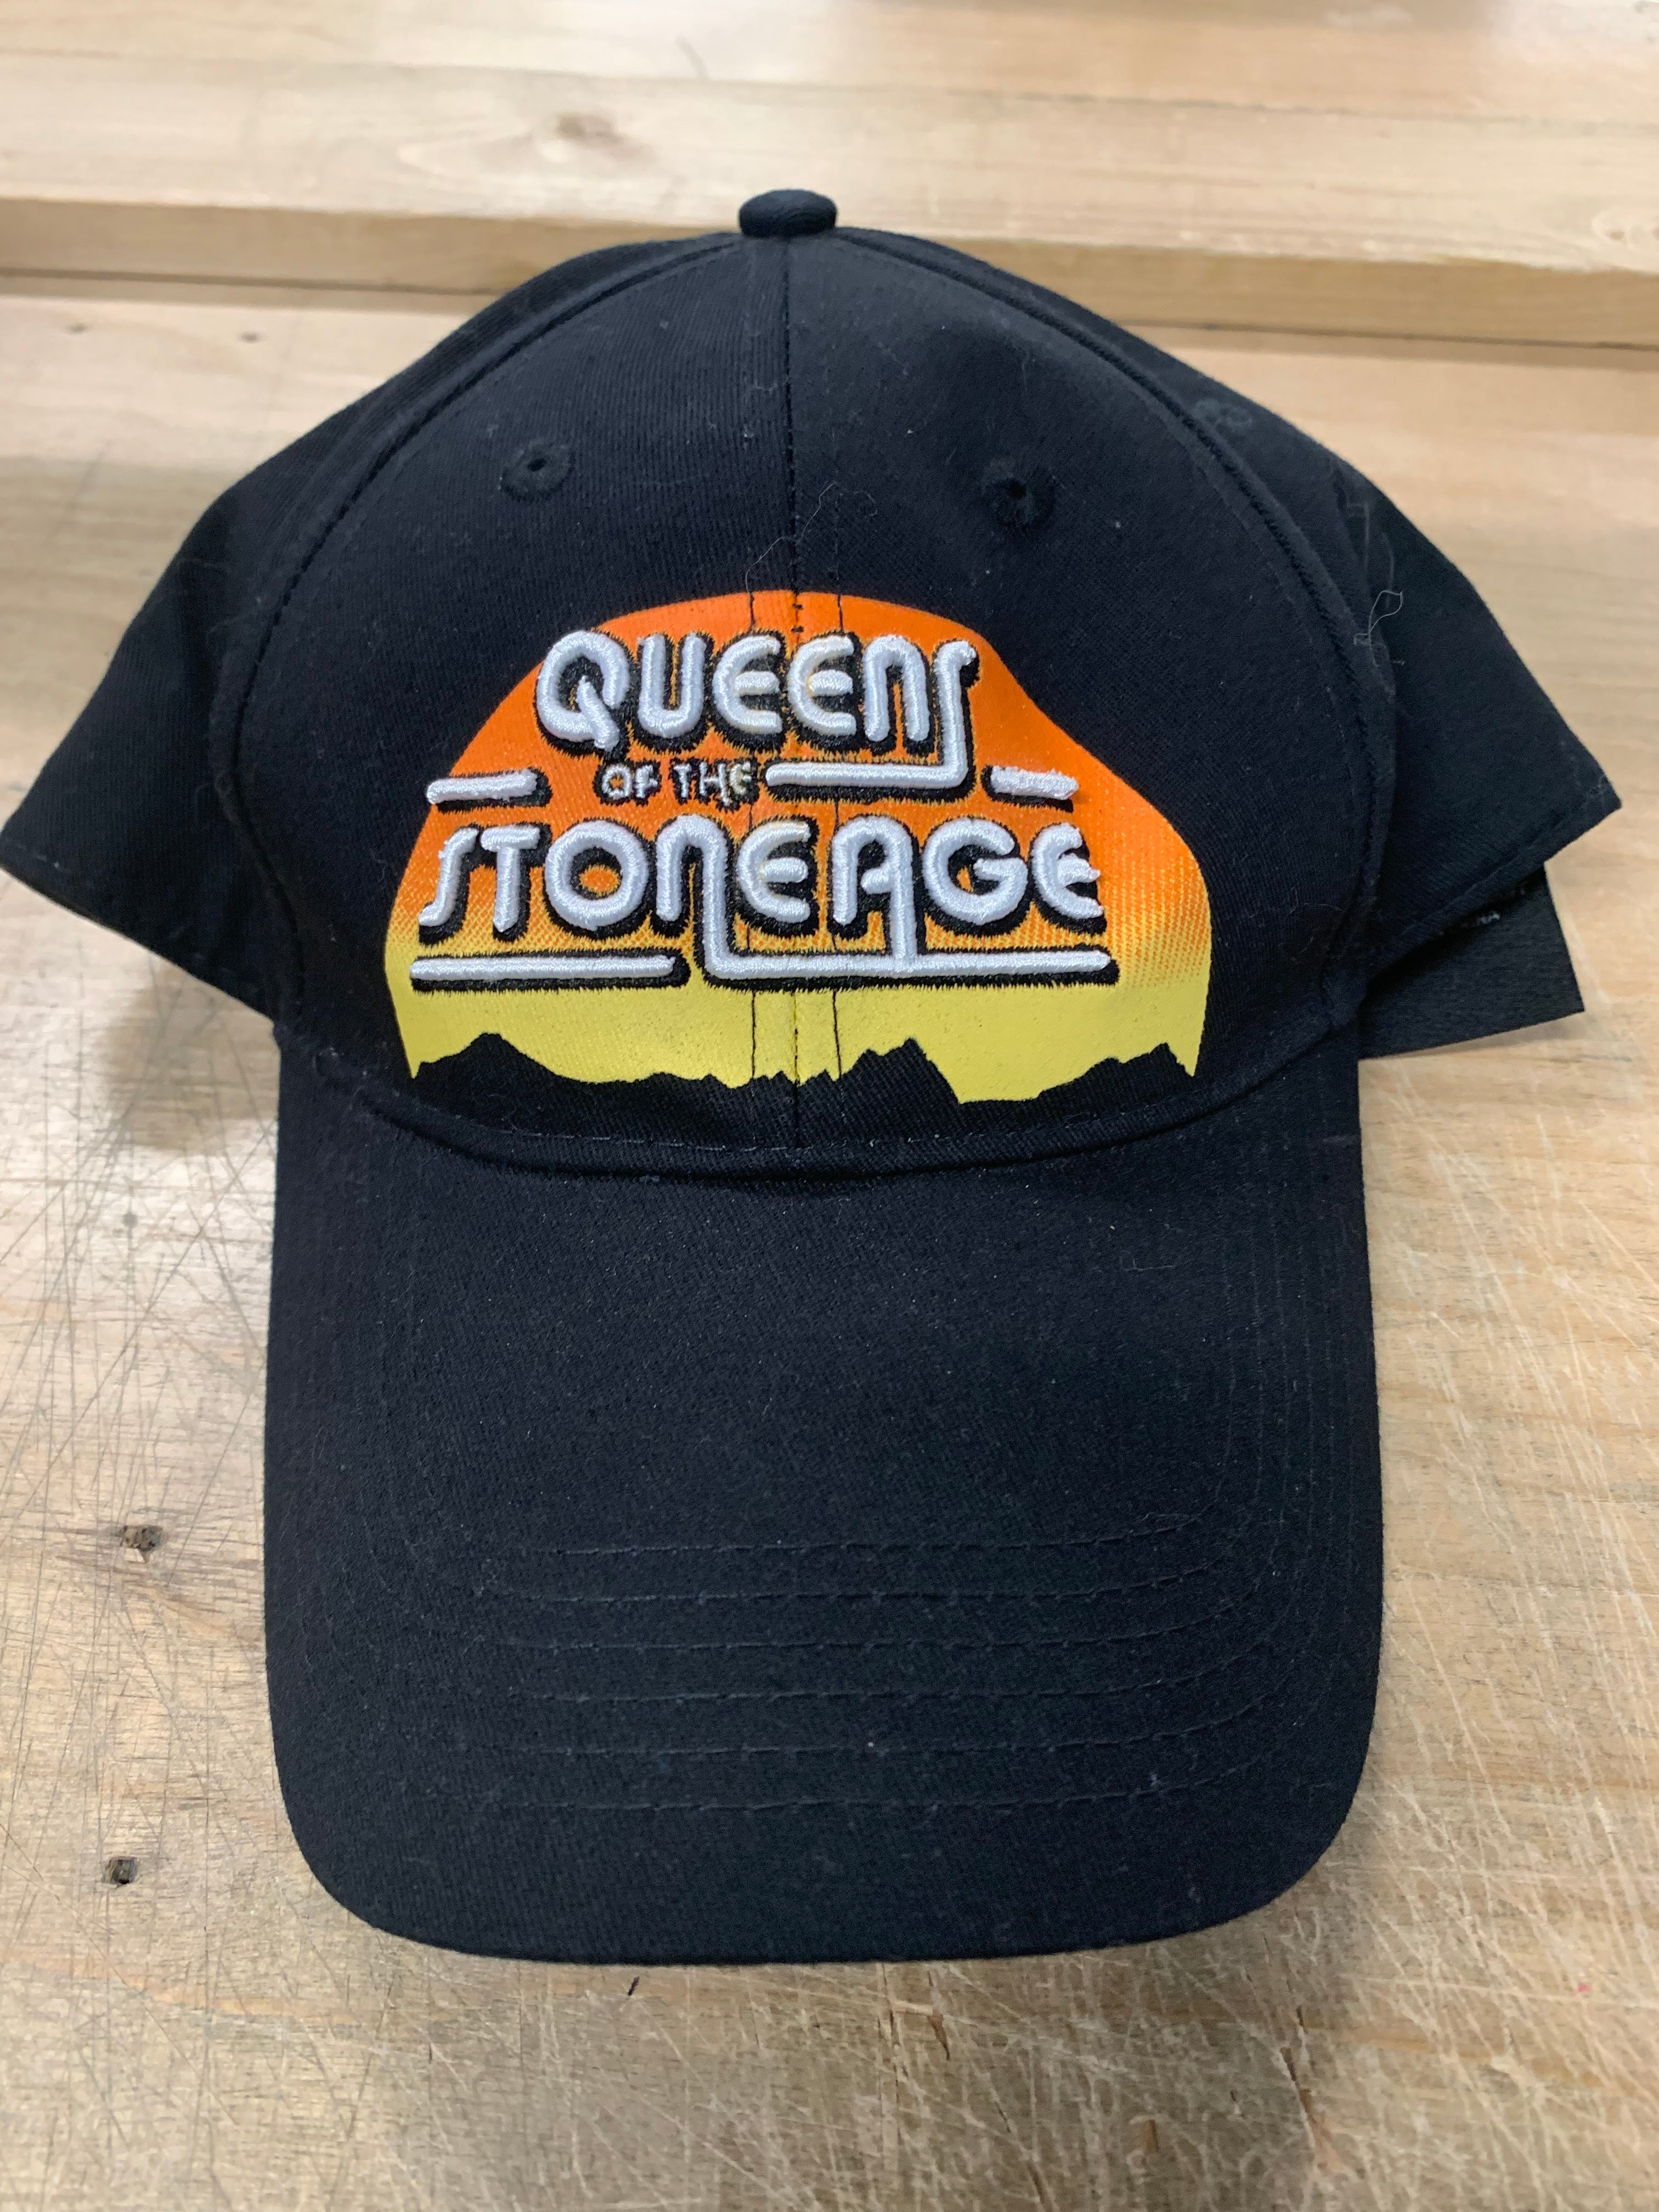 Queens Of The Stone Age Baseball Cap, Black, One Size Fits All